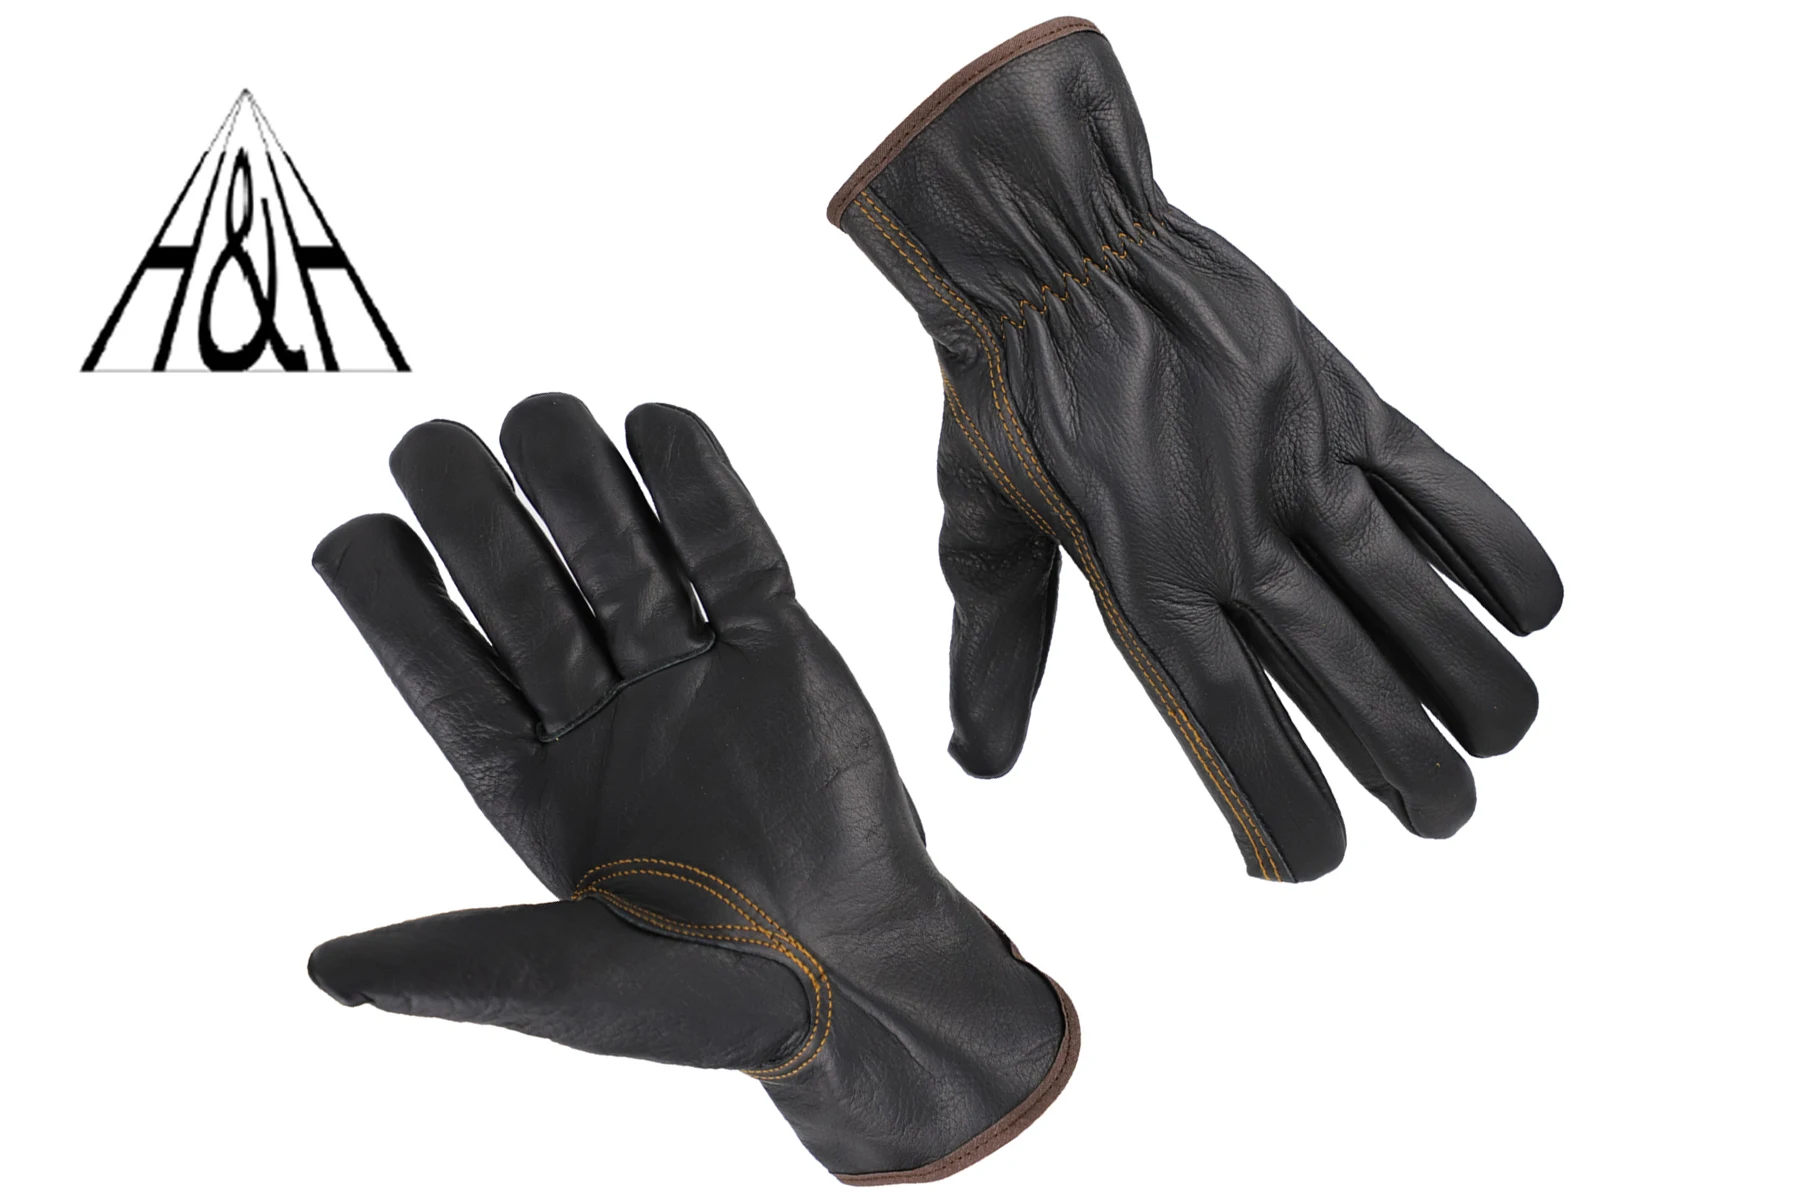 

HHPROTECT Winter Warm Lined Leather Work Gloves Tough Cowhide Garden Glove Extremely Soft and Sweat-absorbent, for Gardening